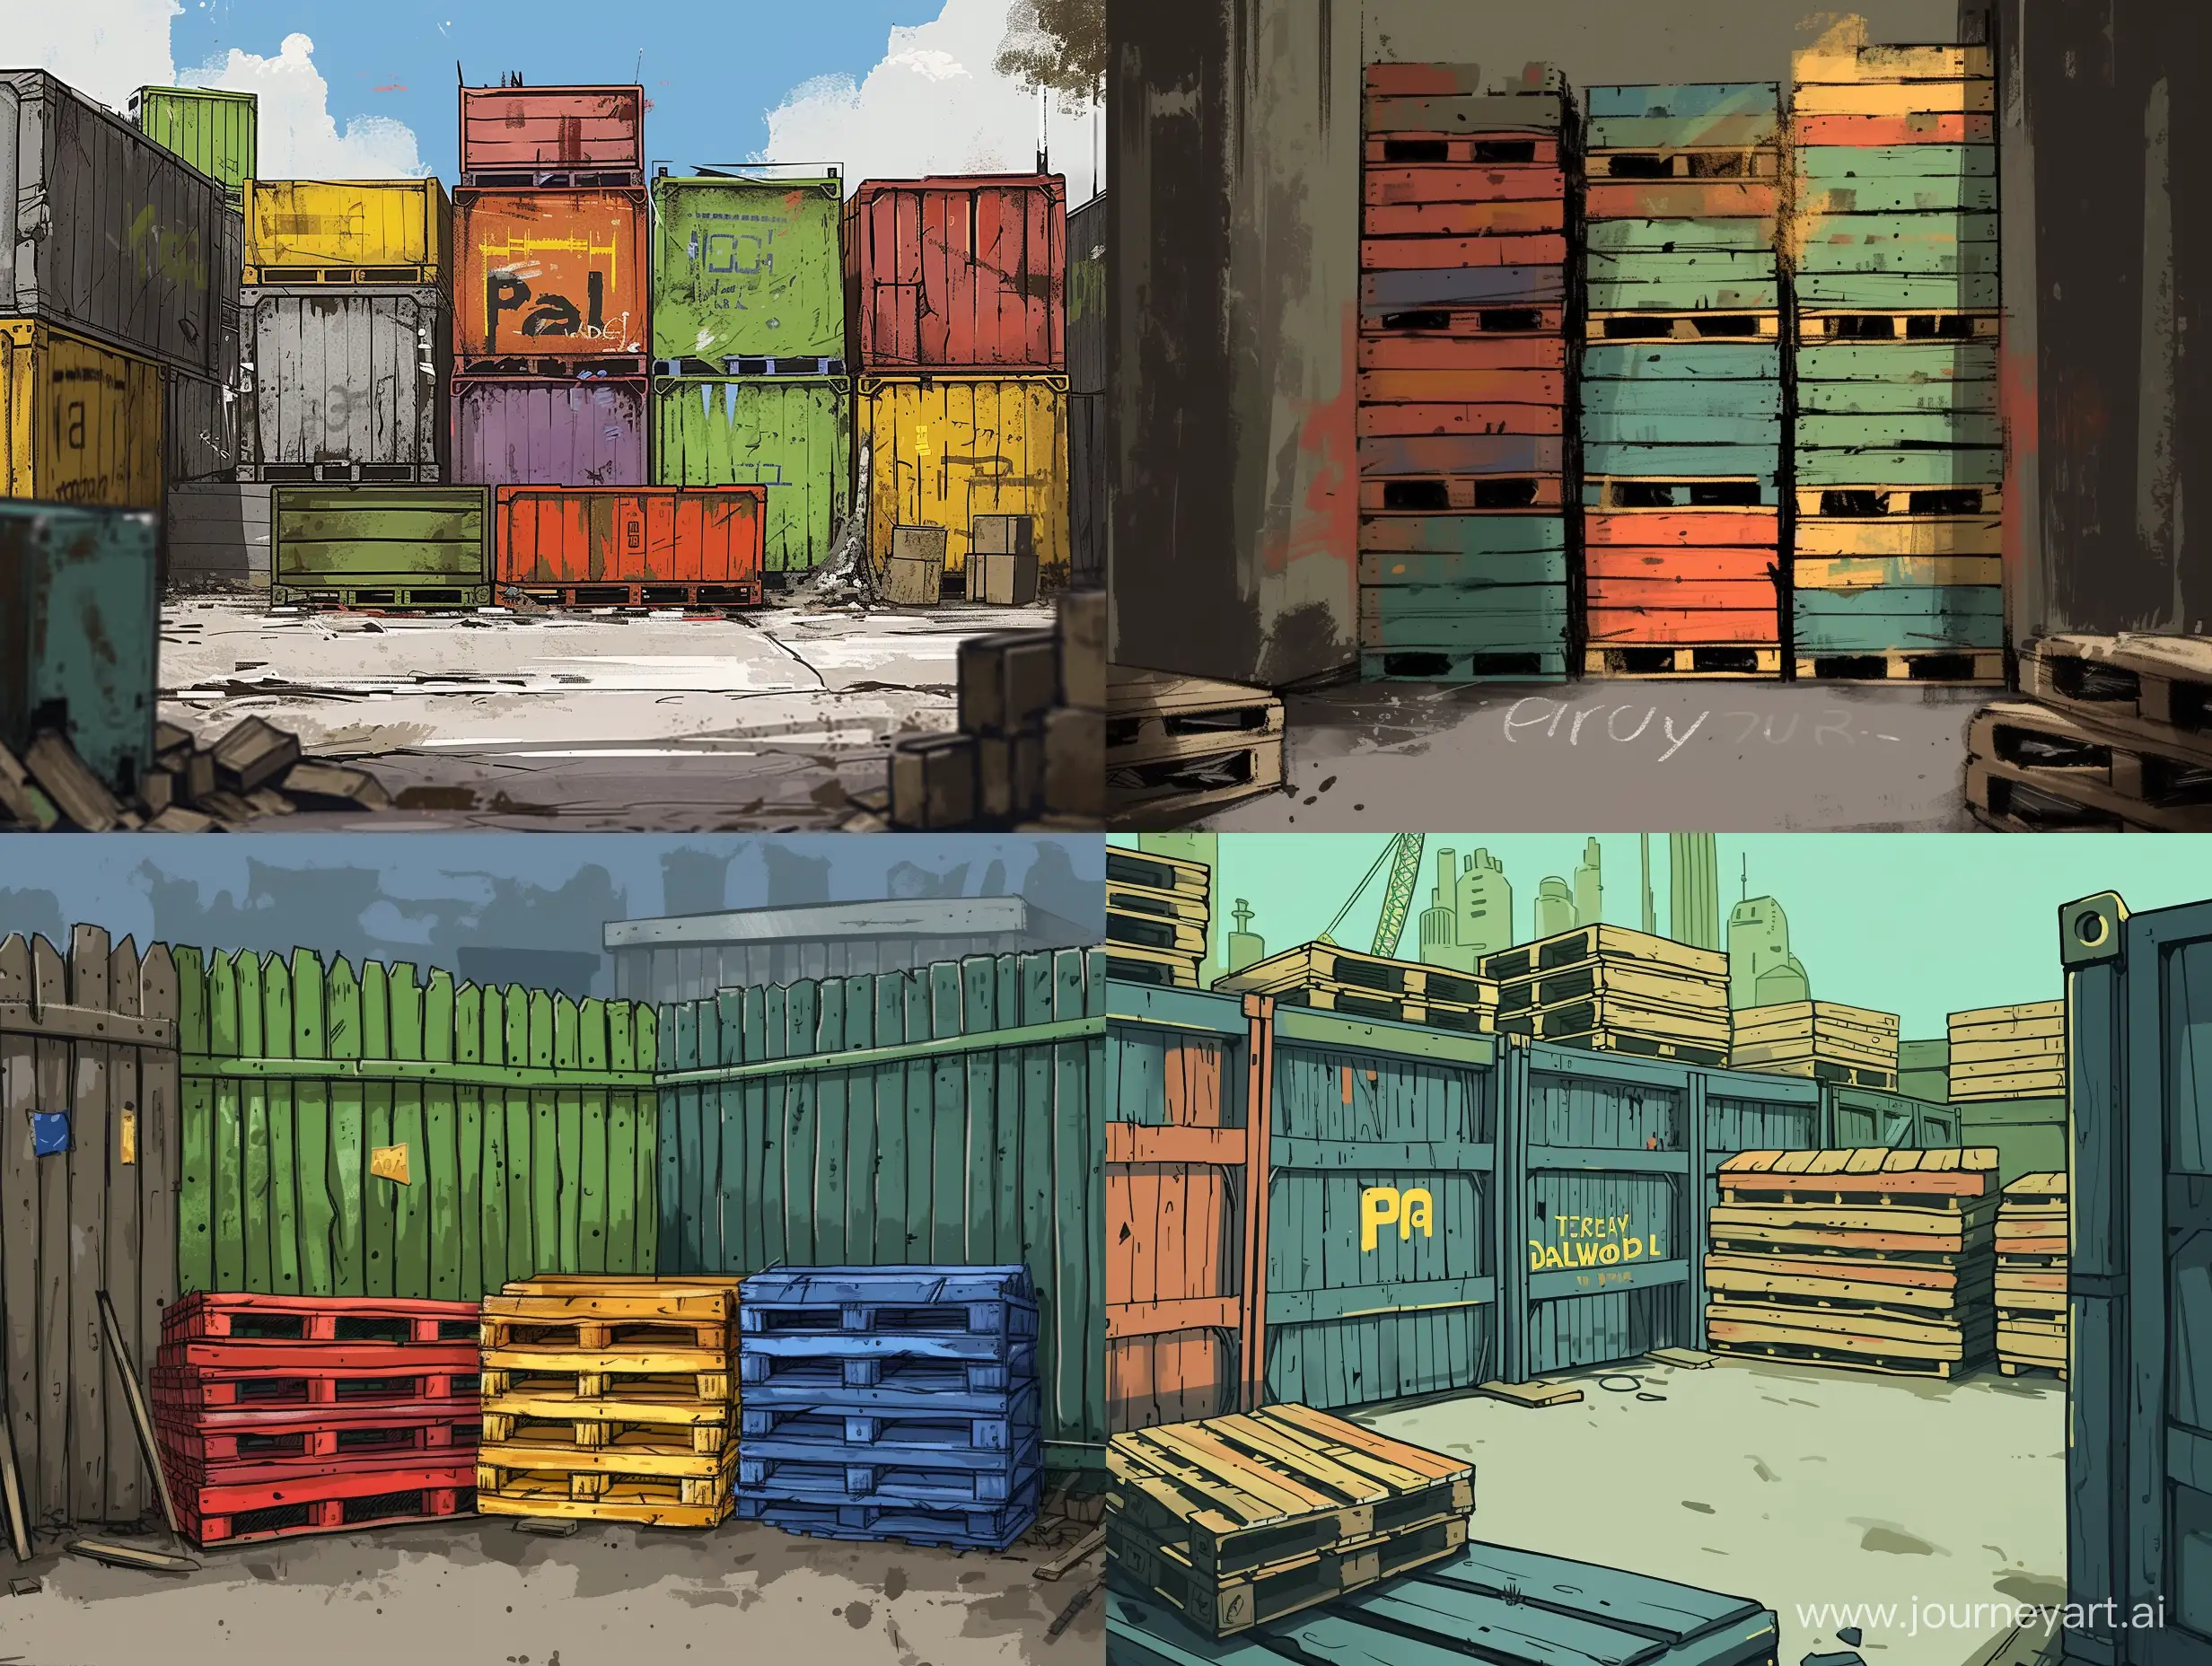 Palworld-Game-Scene-with-Pallets-Colorful-Landscape-Featuring-Game-Elements